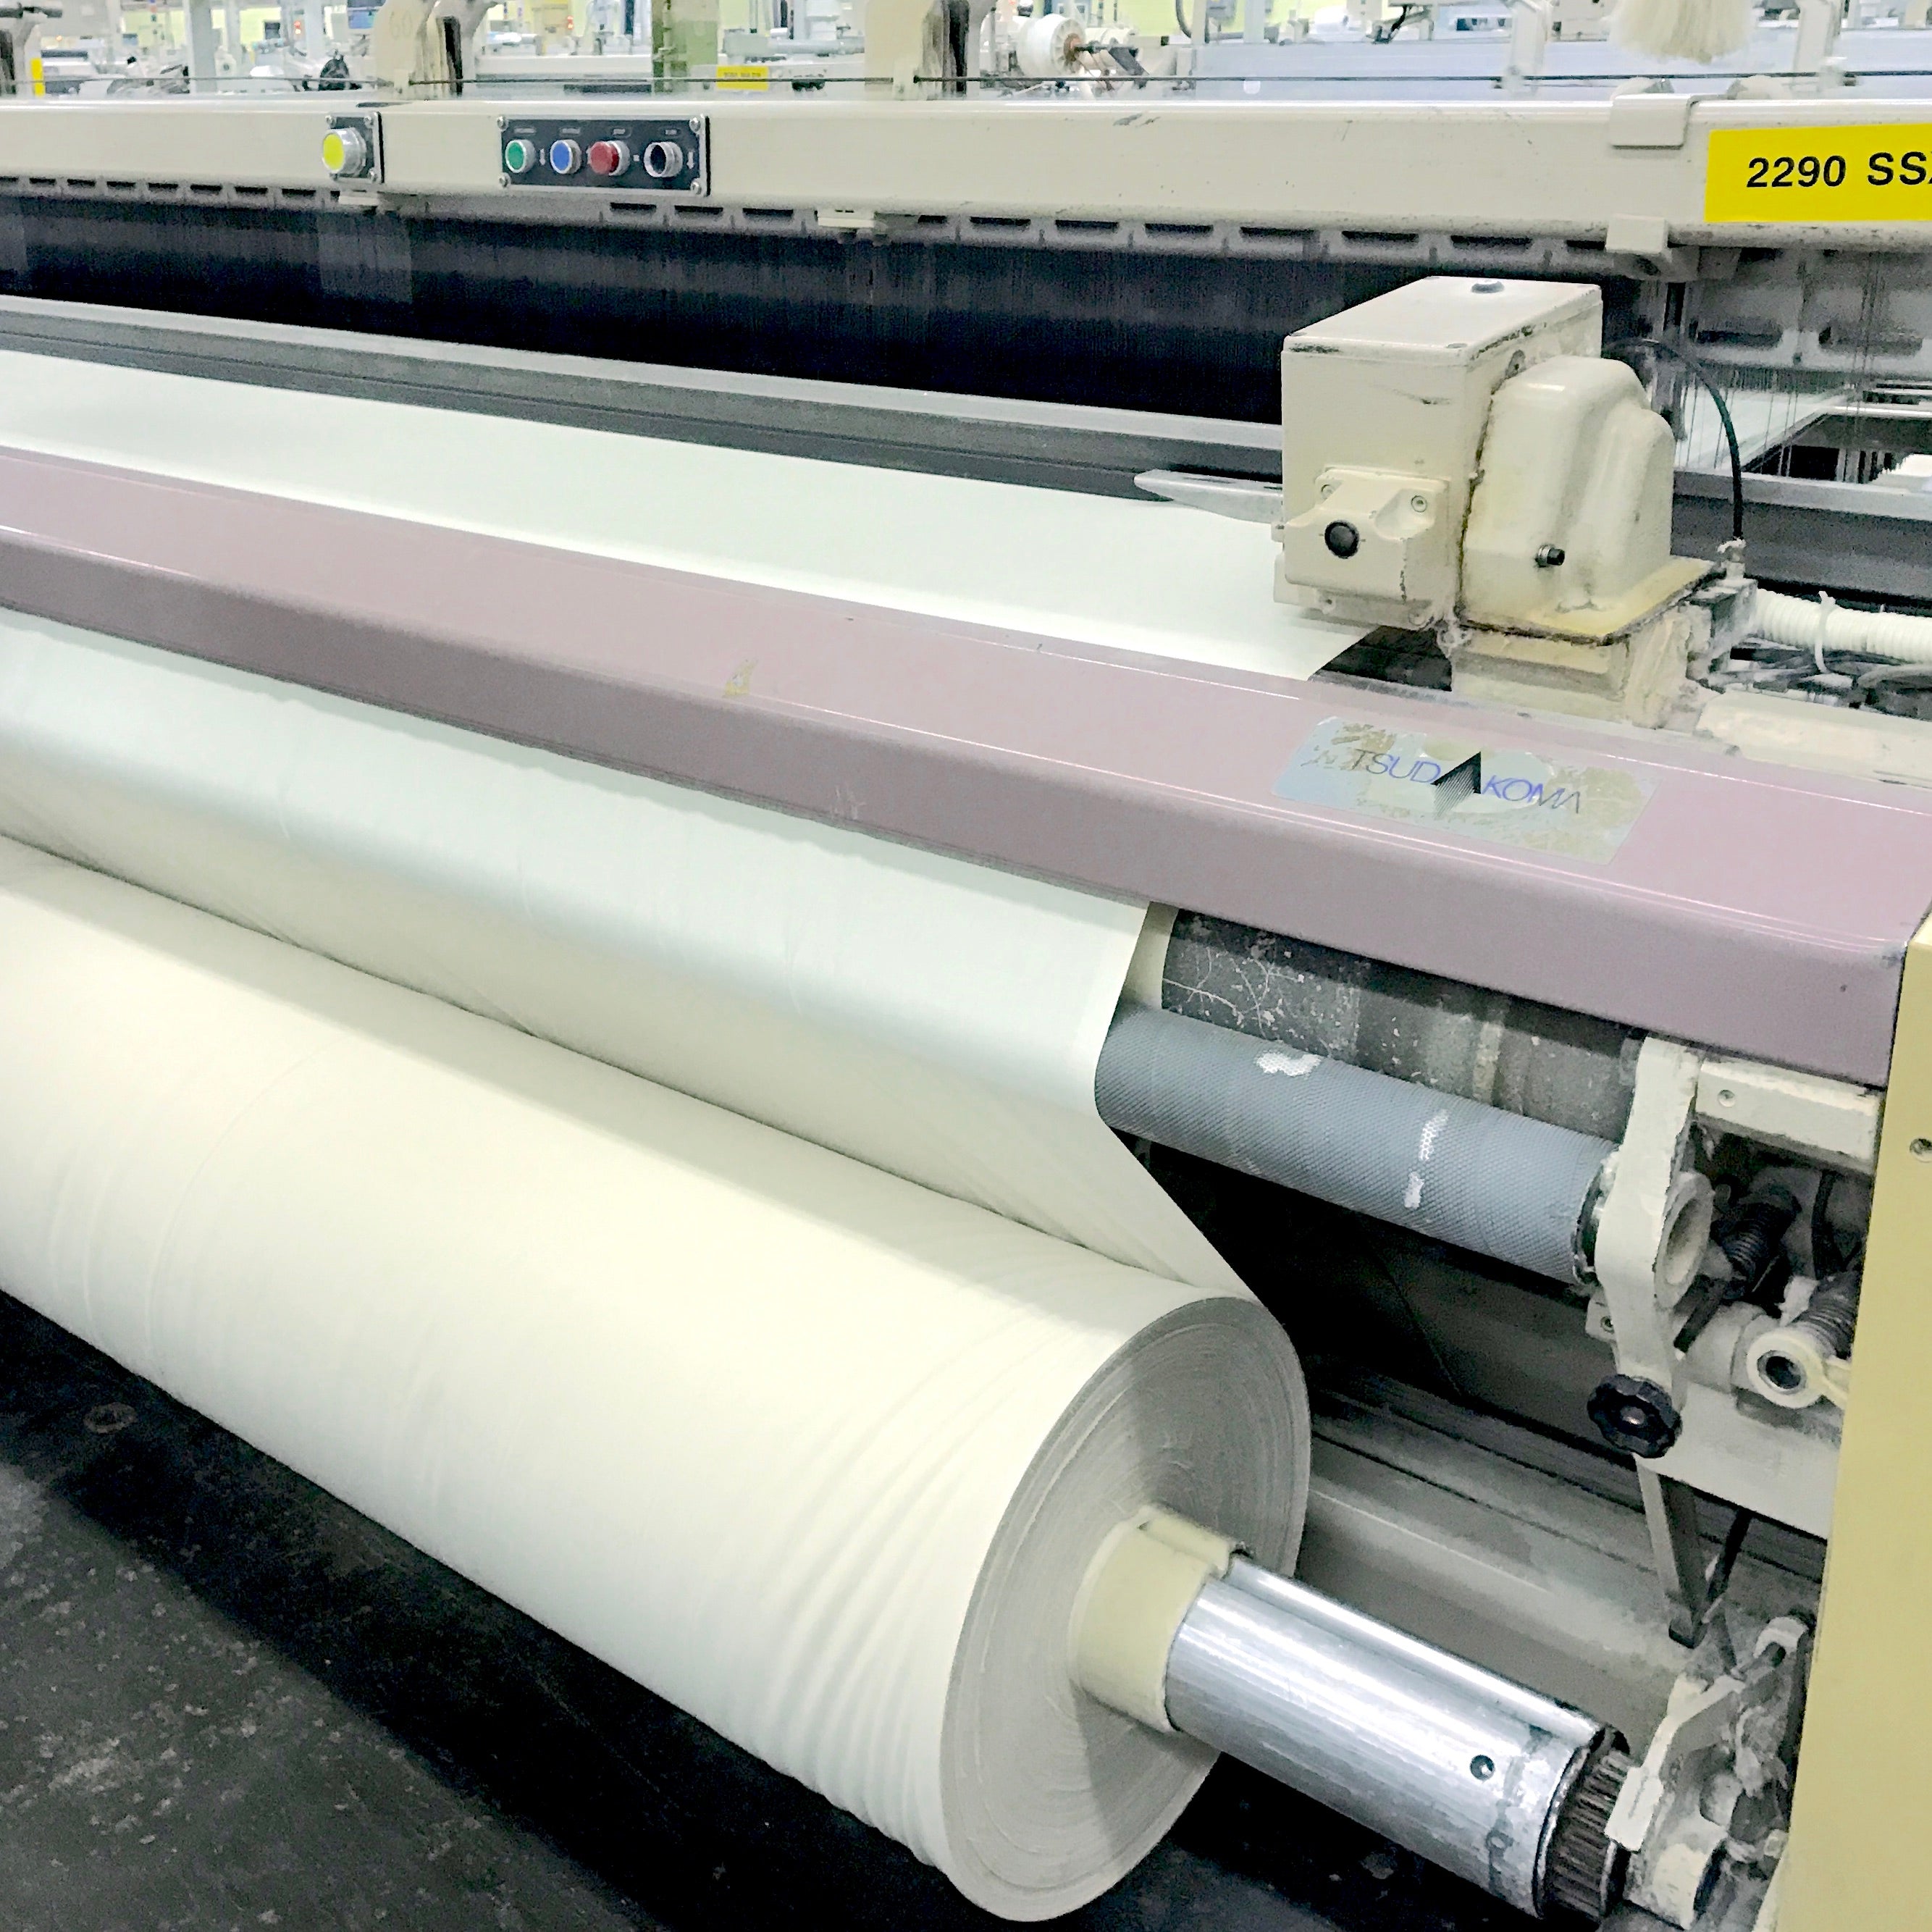 fabric being woven in USA mills